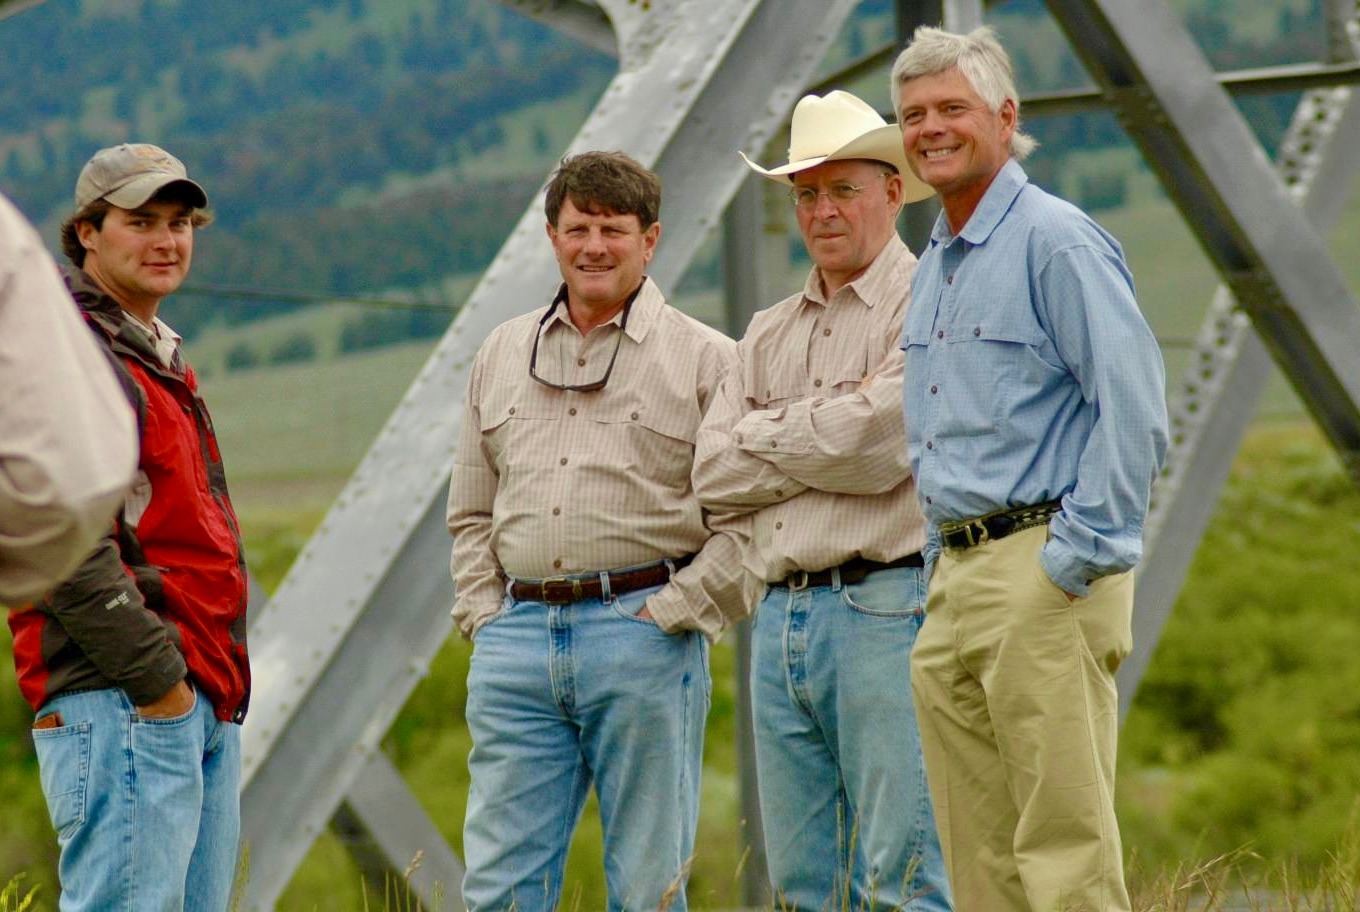 A gathering at Tom Sadler's wedding party in the Madison Valley of Montana at Three Dollar Bridge. Left to right: son of the bride Matt Henderson, best man the late Jim Range,  Sadler and angler-conservationist Craig Mathews who officiated the ceremony. Along with the late Alex Diekmann of Trust for Public Land, they also were major players involved with the Three Dollar Bridge fishing access and riparian corridor protection project.  Photo courtesy Tom Sadler